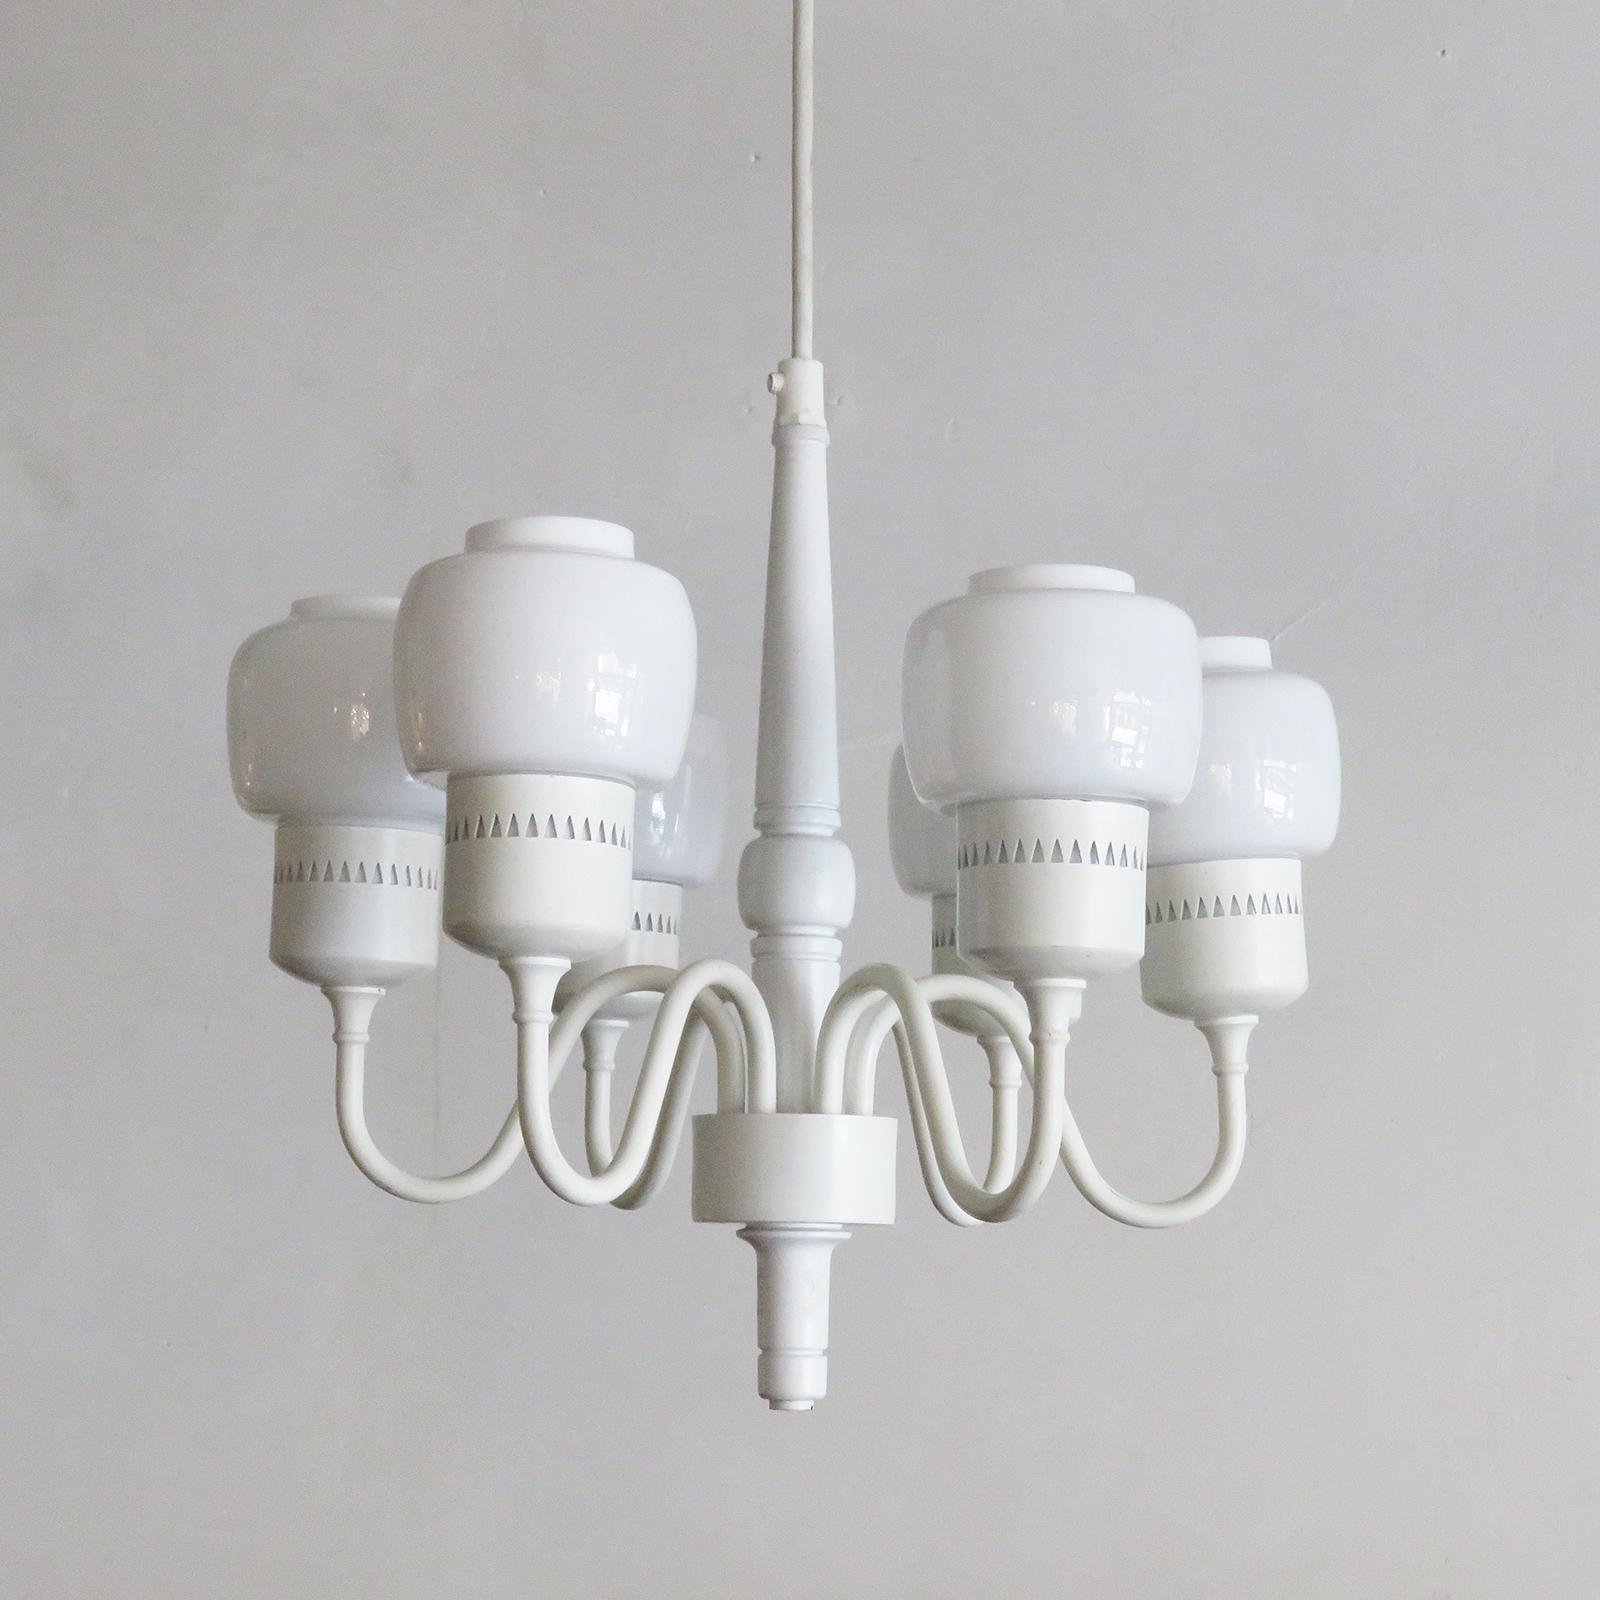 Wonderful pendant lamp Model T-526, designed by Hans-Agne Jakobsson for Markaryd, Sweden, 1960, with white enameled wood and metal frame and white glass bulb covers. The overall drop is adjustable, marked on the frame, wired for US standards, six